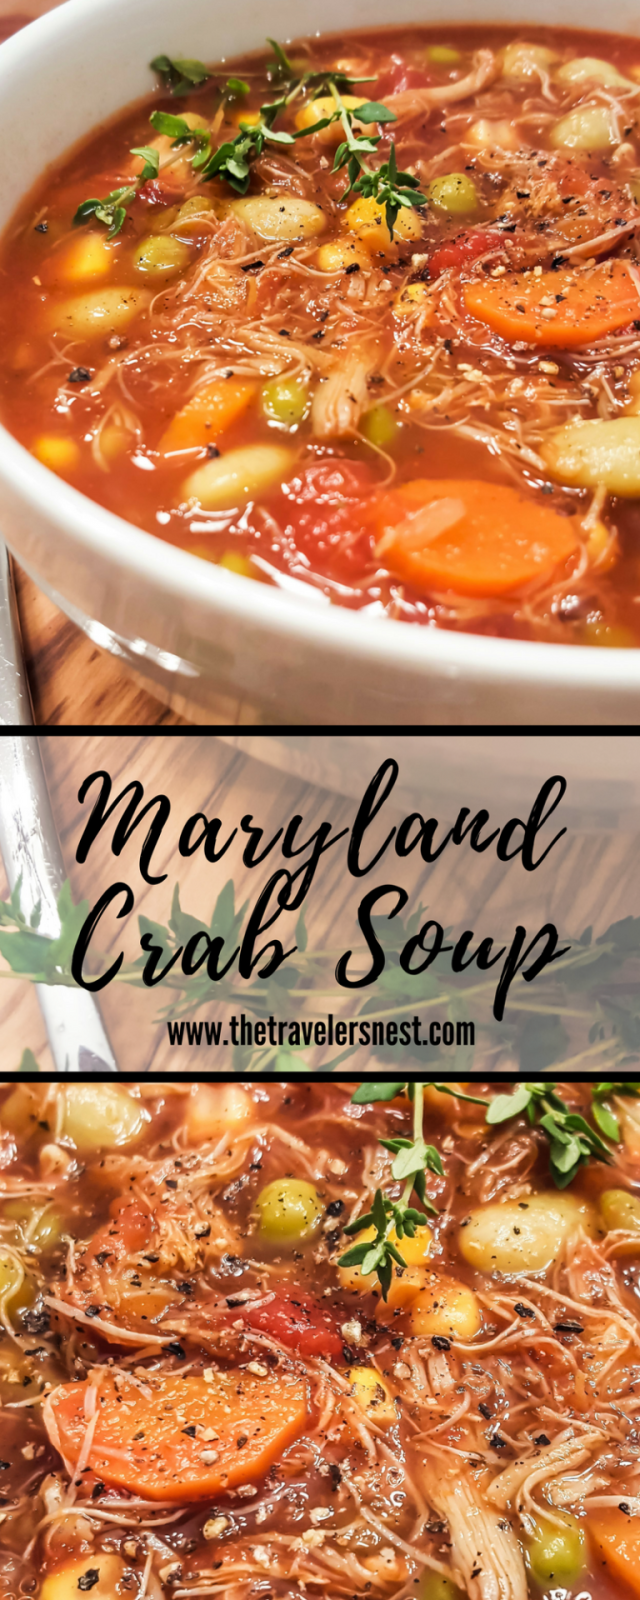 Maryland-Crab-Soup-New